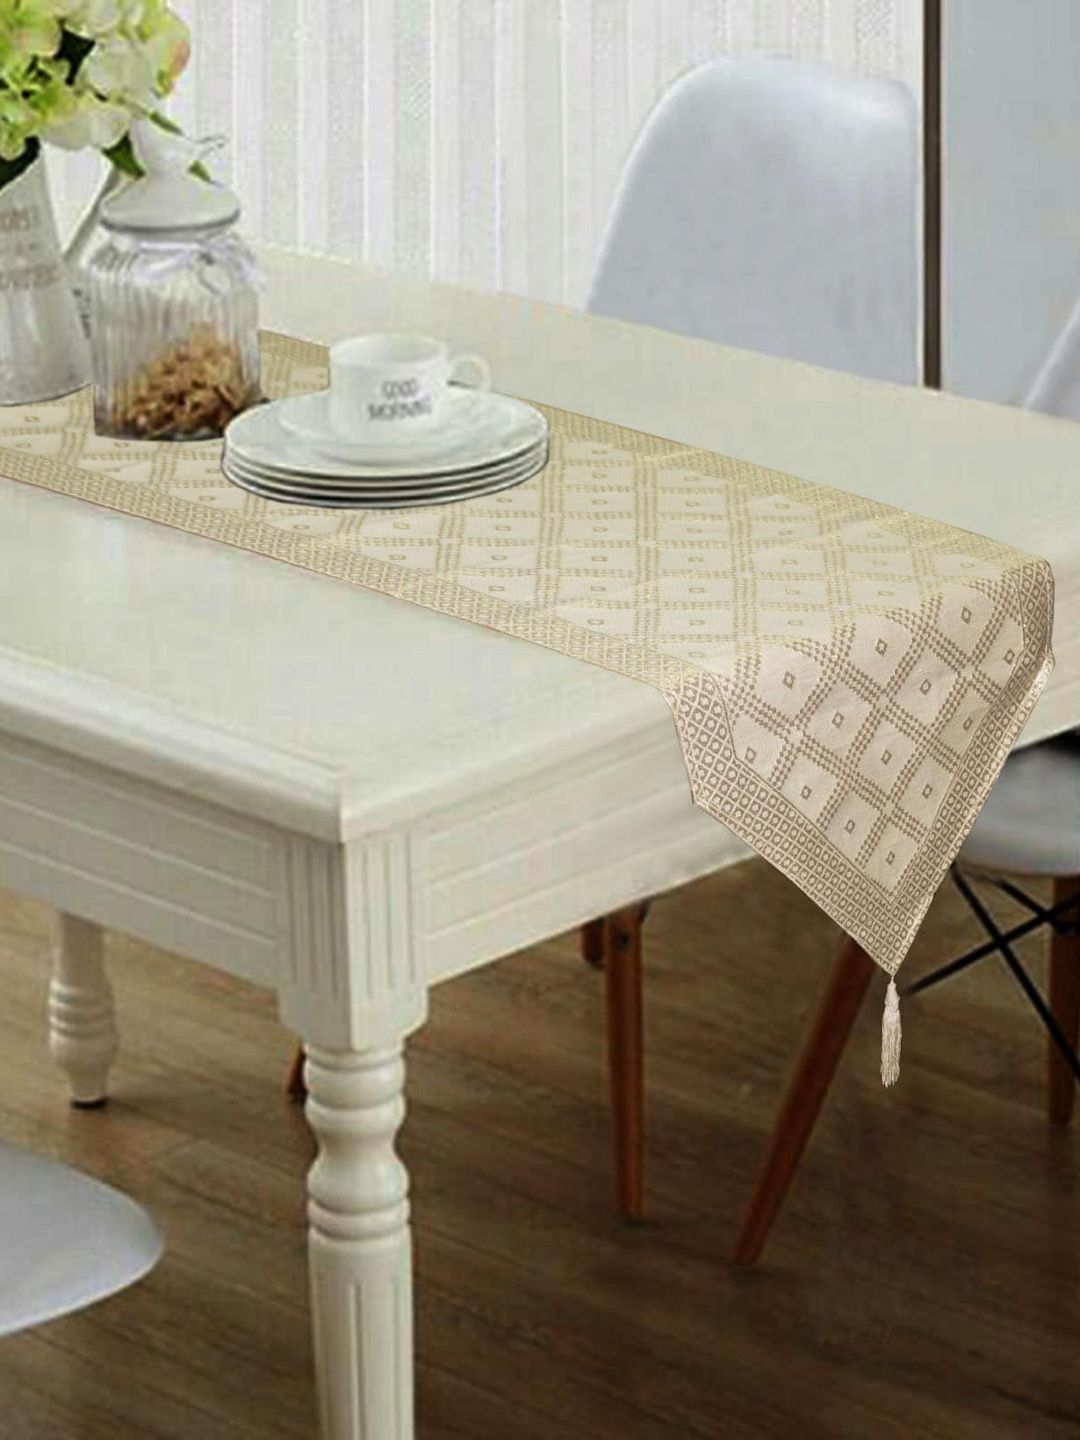 Lushomes Cream Colored & Gold-Toned Printed Table Runner Price in India